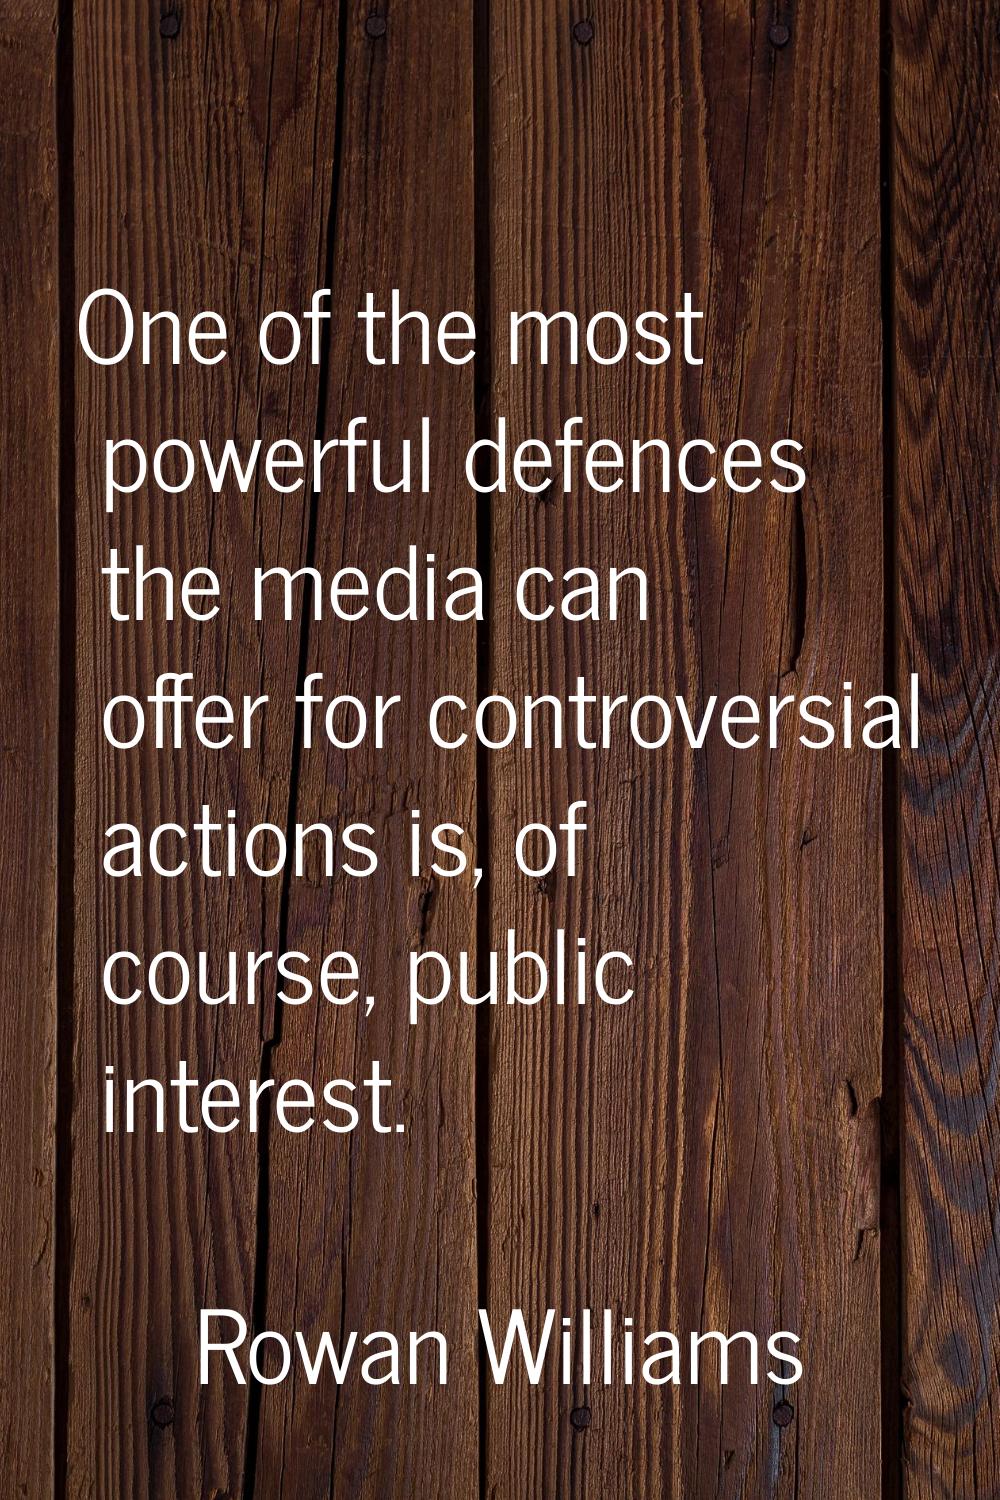 One of the most powerful defences the media can offer for controversial actions is, of course, publ